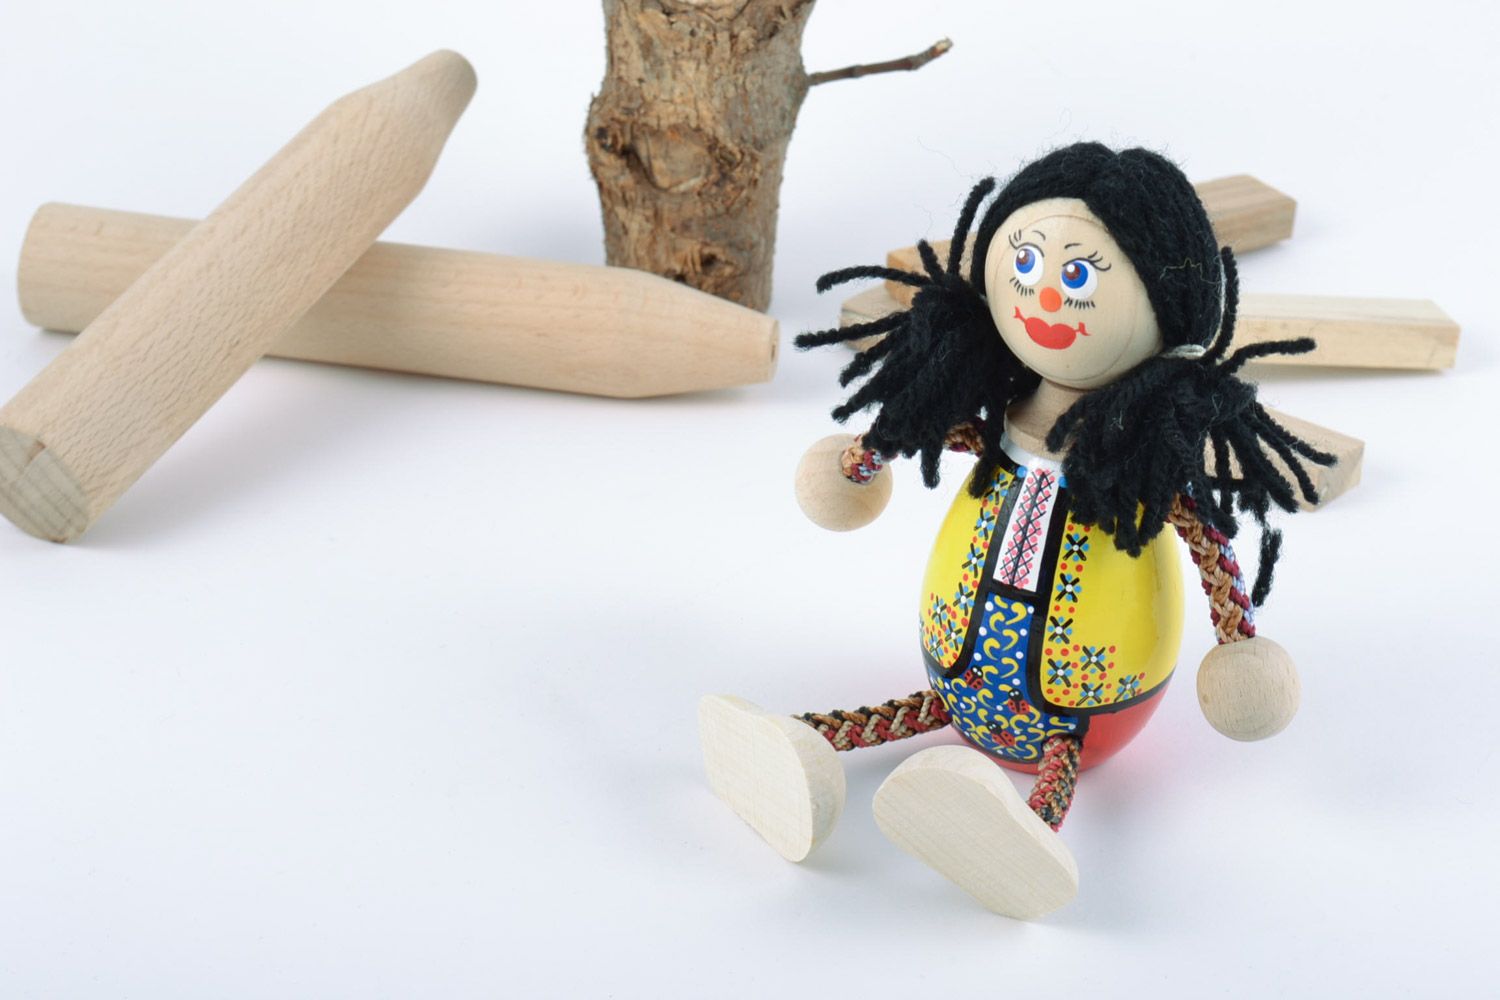 Handmade eco wooden toy girl with thread legs for children and home decor photo 1